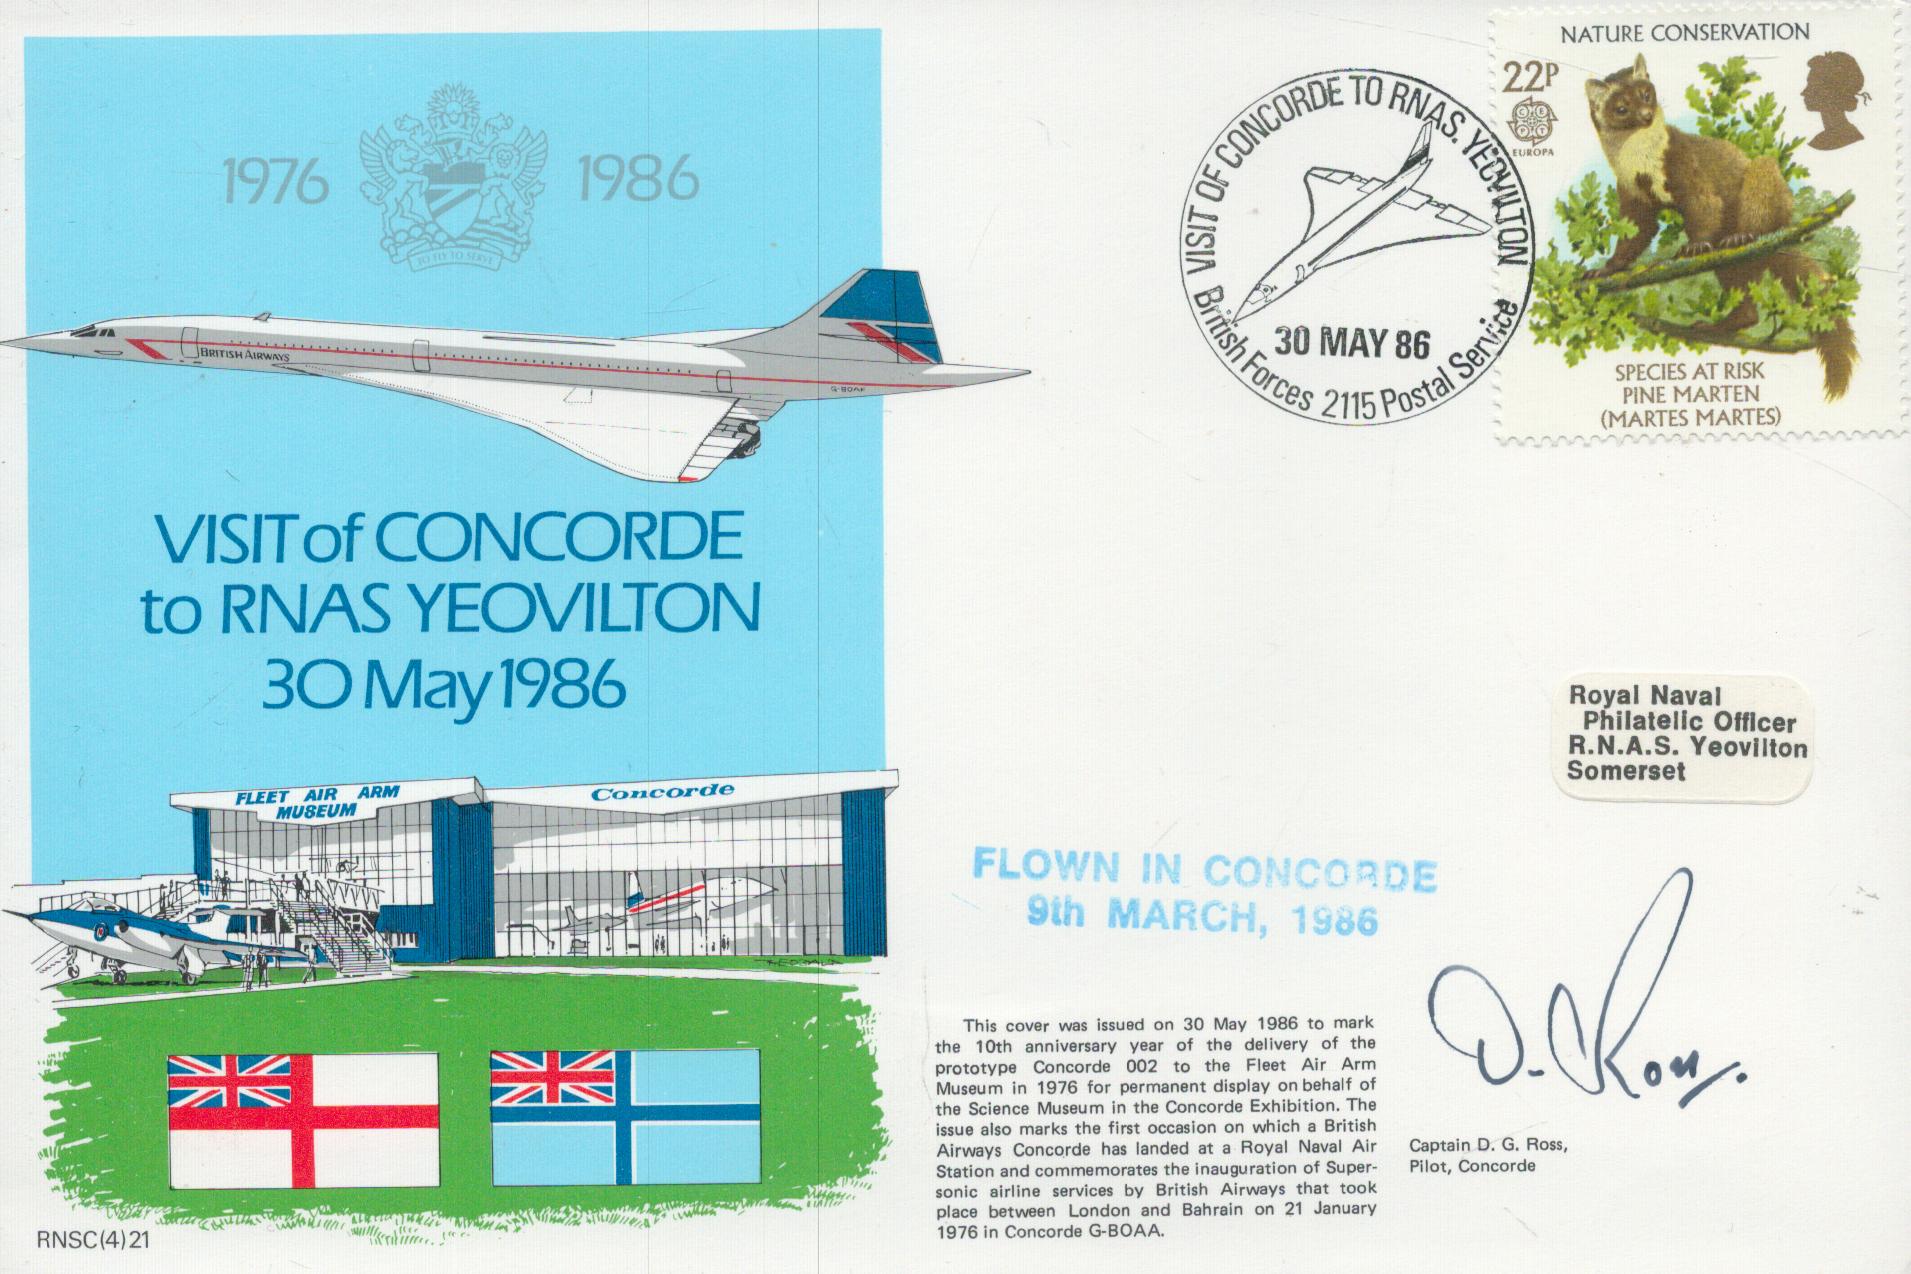 Concorde Capt D Ross signed 1986 Visit of Concorde to RNAS Yeovilton official Navy cover, flown.